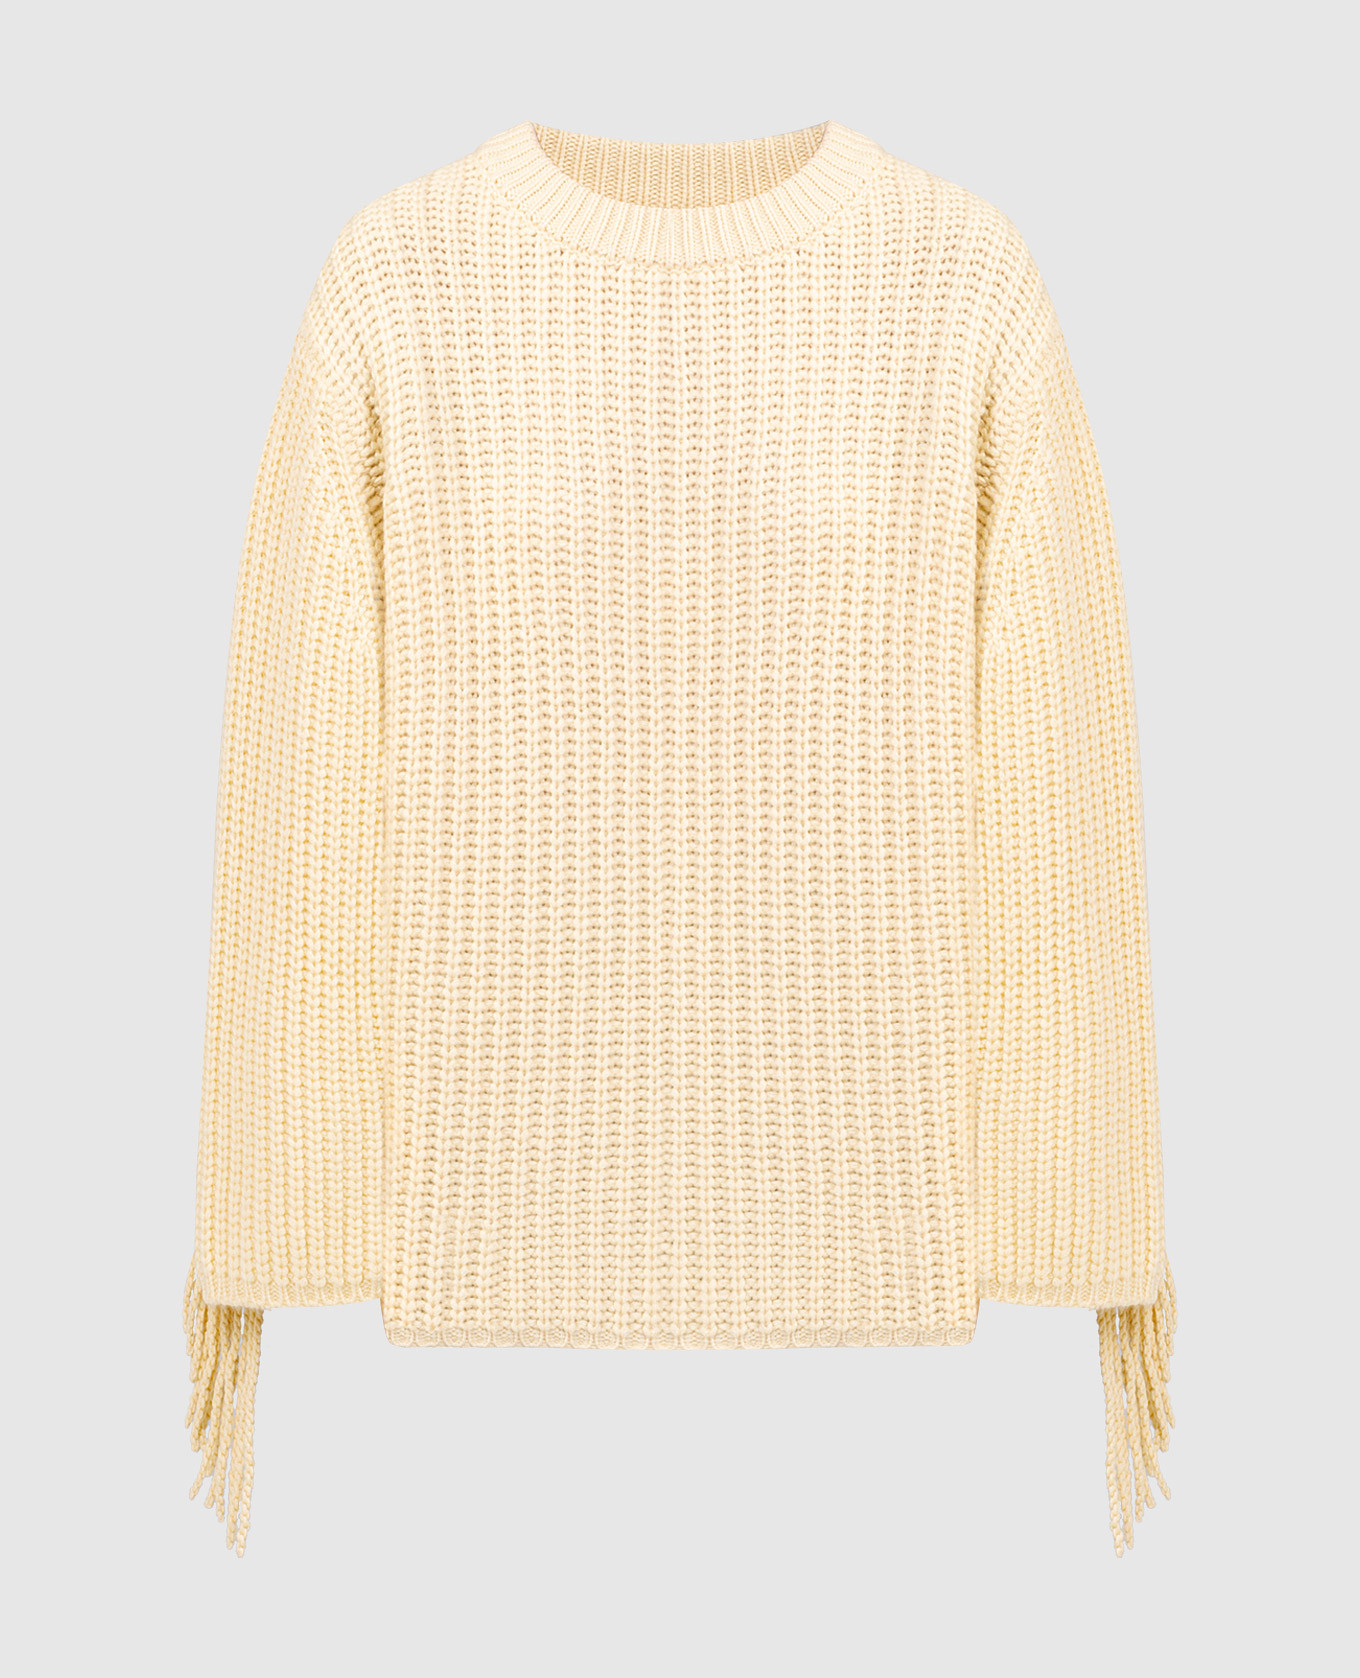 Yellow cashmere sweater with fringe